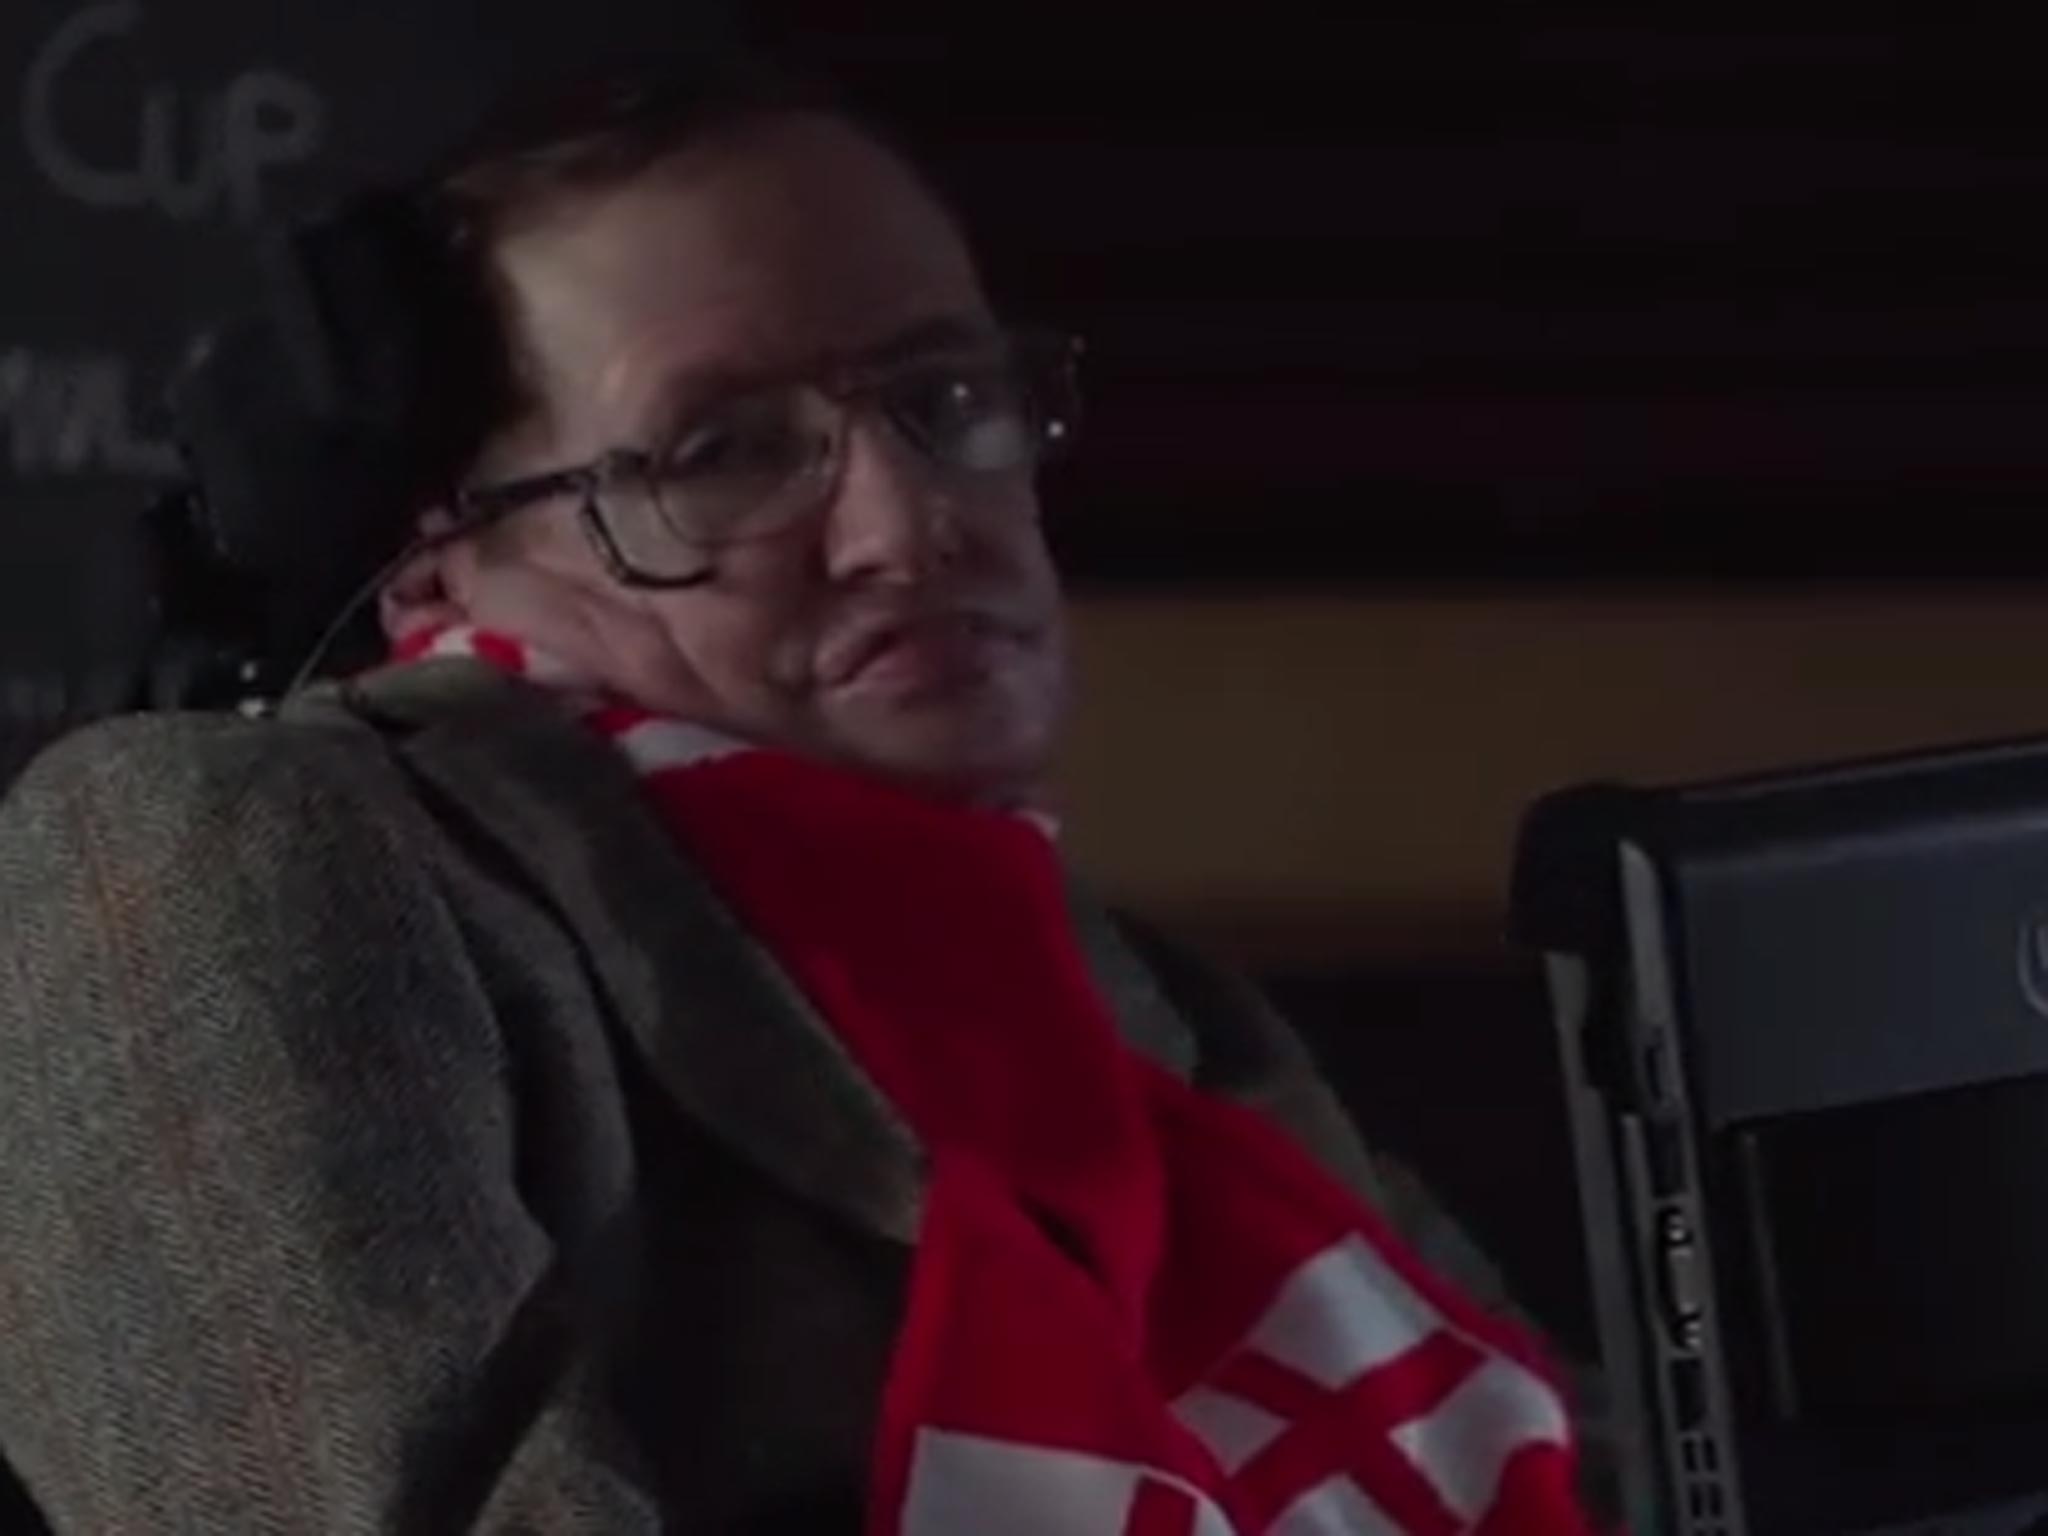 Professor Stephen Hawking shares World Cup data and explains England's best chances of winning